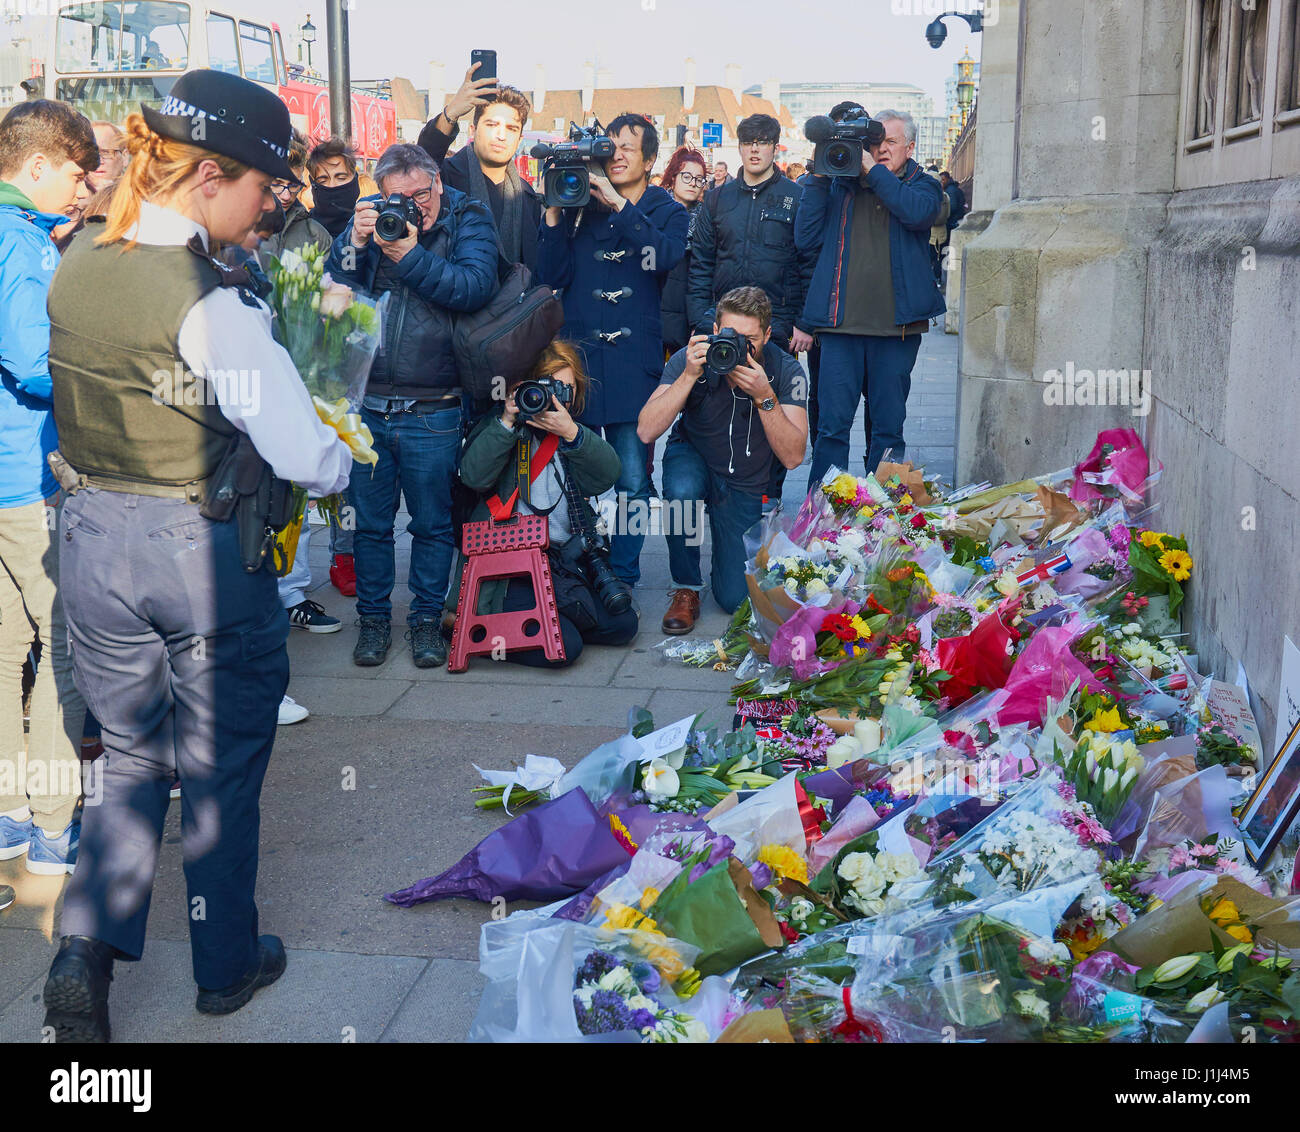 Policewoman bringing flowers for victims of the Westminster terrorist attack, London, England Stock Photo